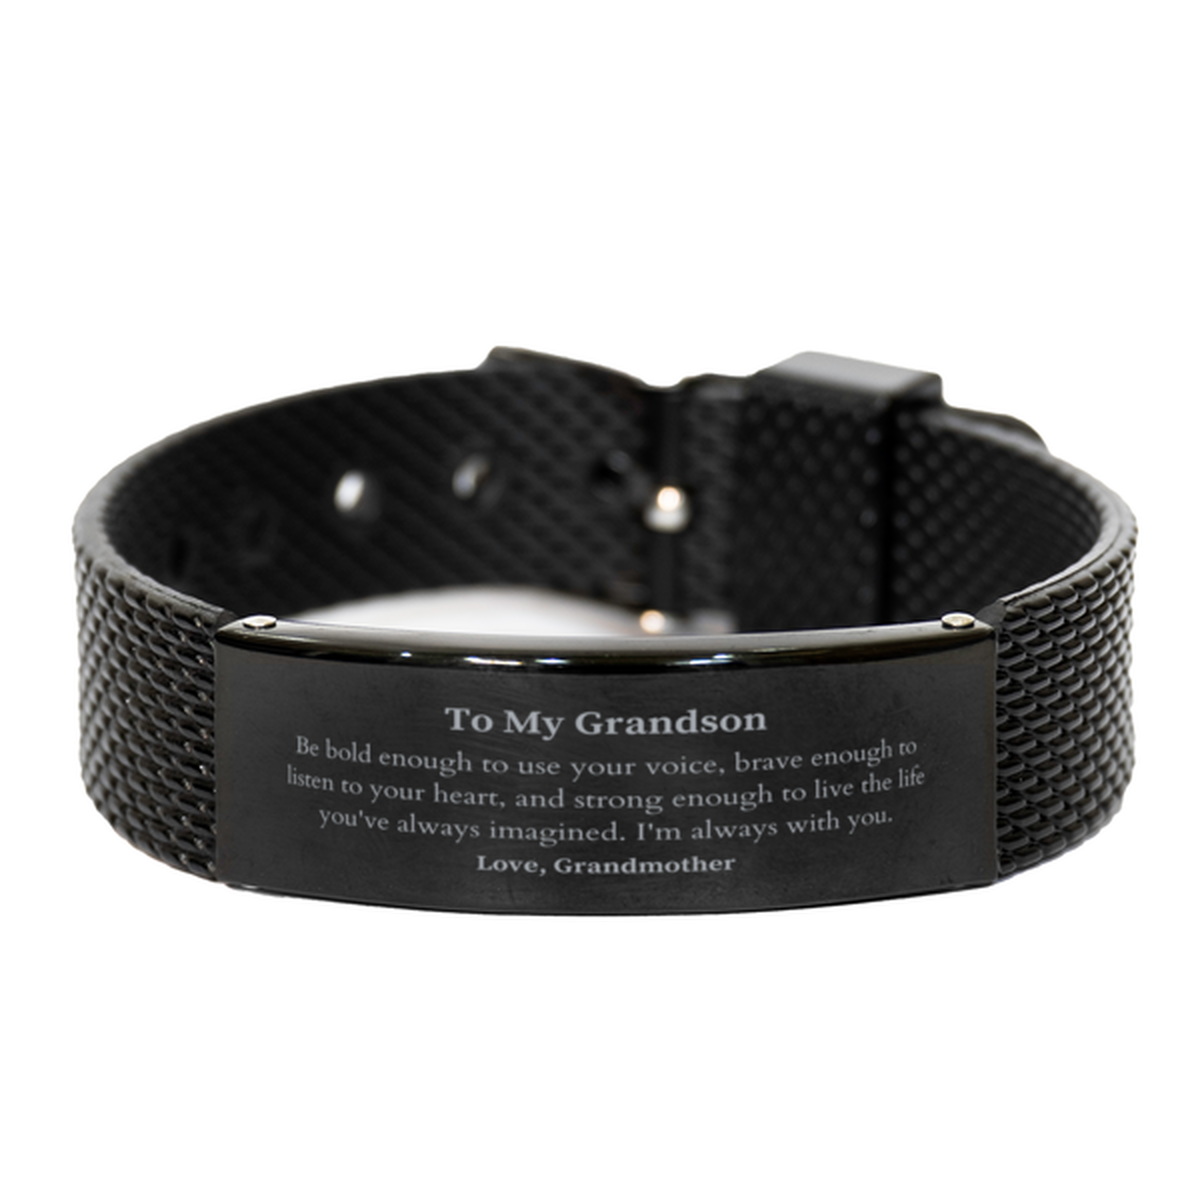 Keepsake Grandson Black Shark Mesh Bracelet Gift Idea Graduation Christmas Birthday Grandson from Grandmother, Grandson Be bold enough to use your voice, brave enough to listen to your heart. Love, Grandmother